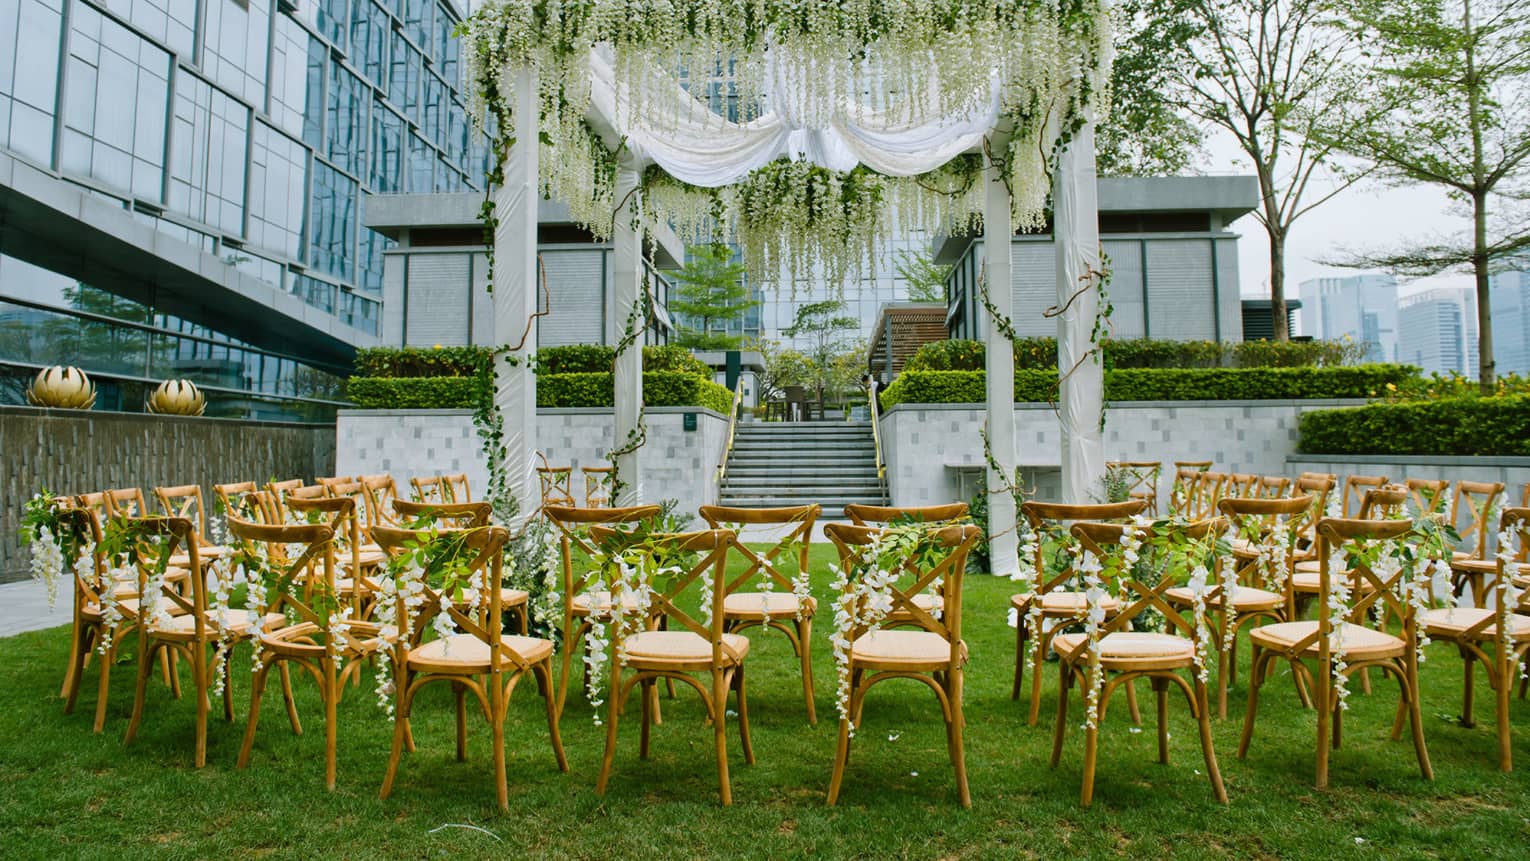 Wedding on event lawn, rows of chairs under large altar with white fabric, vines 